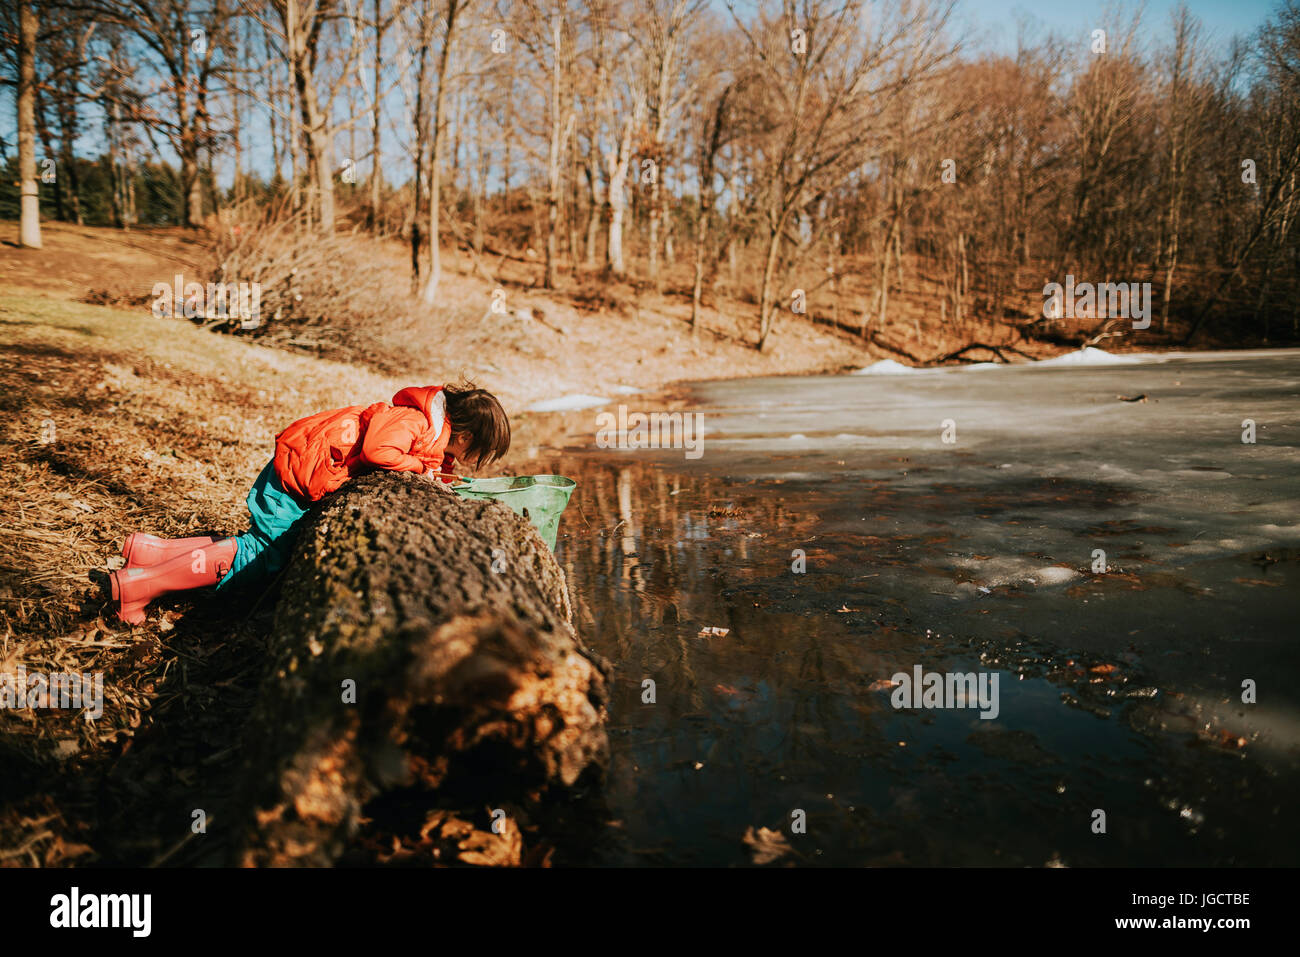 Girl by a pond collecting water bugs Stock Photo